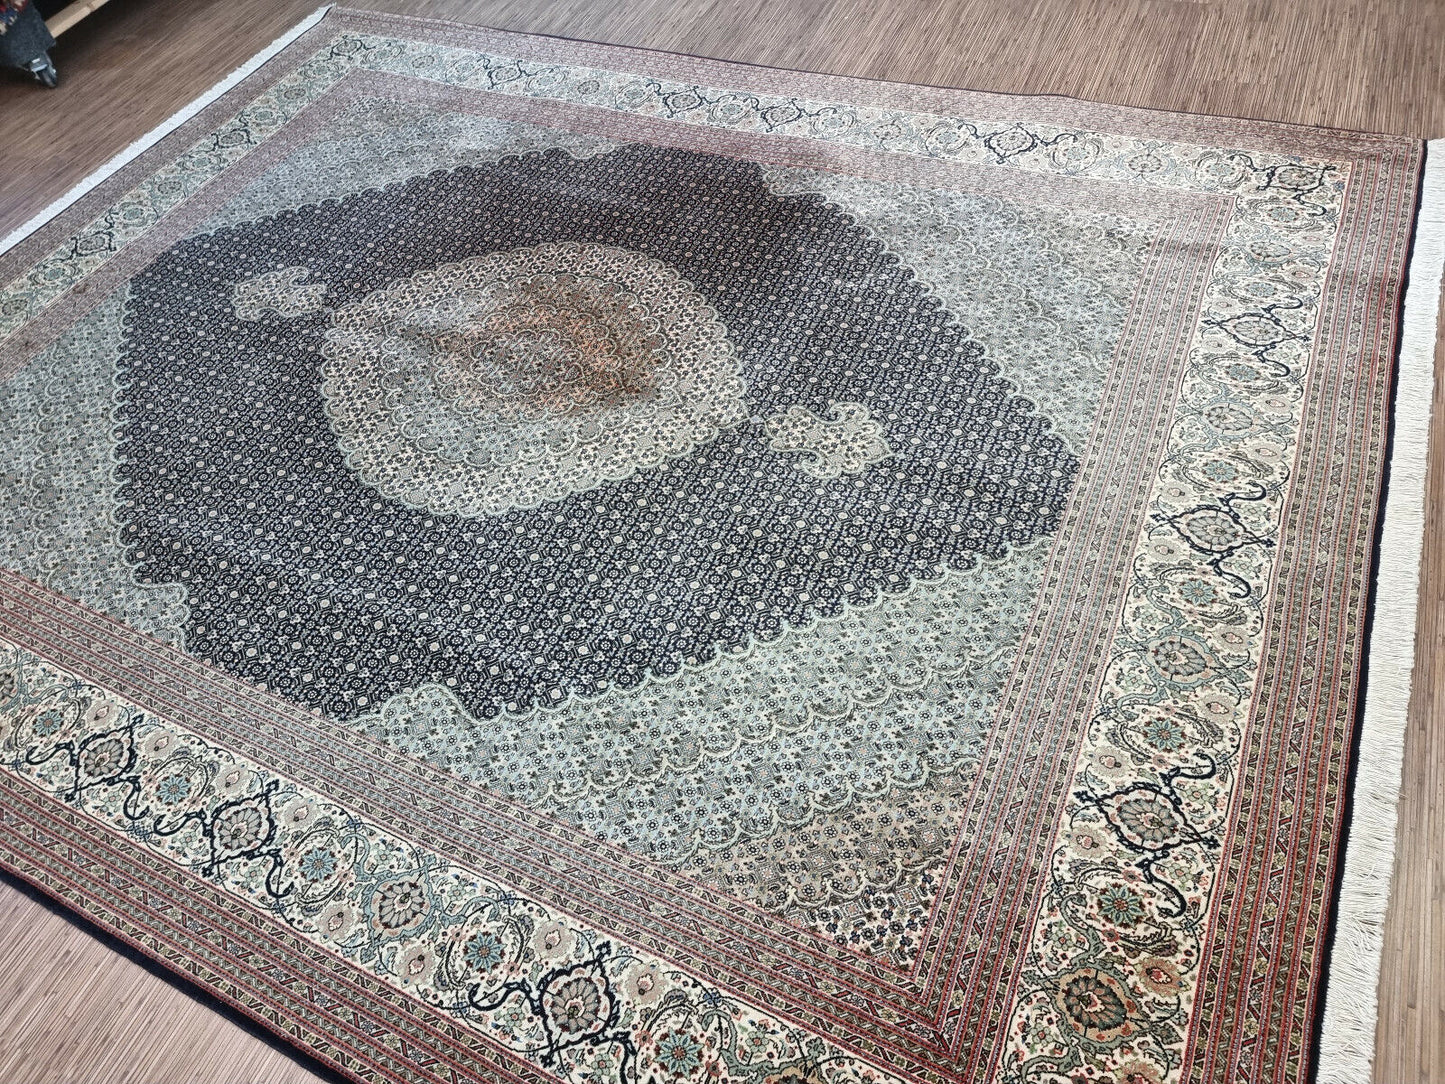 Close-up of the age discoloration and character of the medallion on the rug